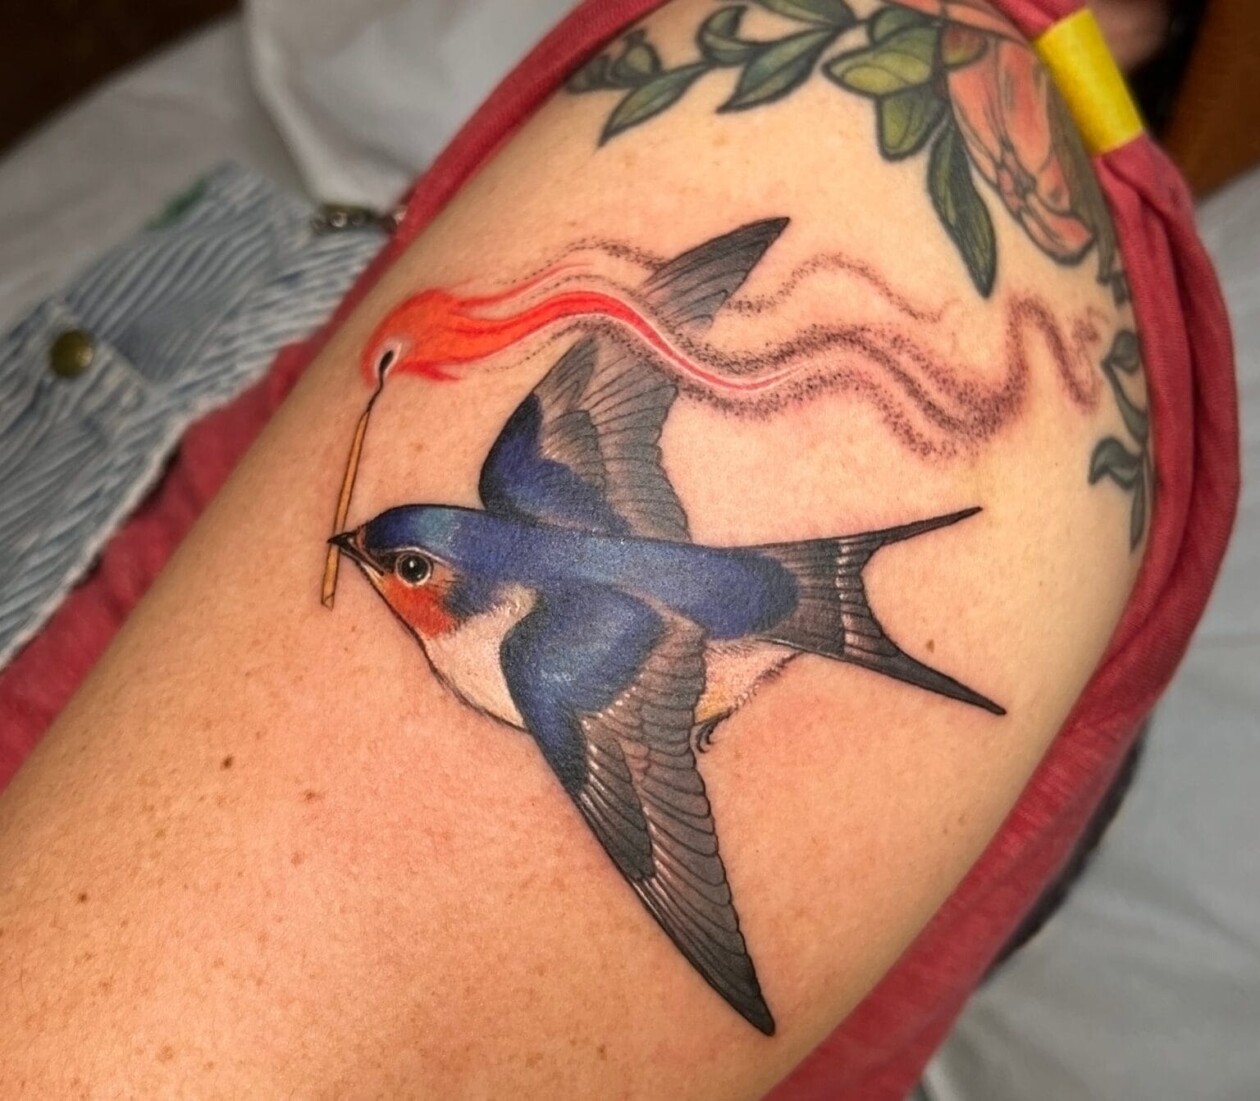 Stephanie Brown Creates Whimsical Tattoos Of Birds Holding A Lit Match Symbolizing Hope For A Better Future (5)